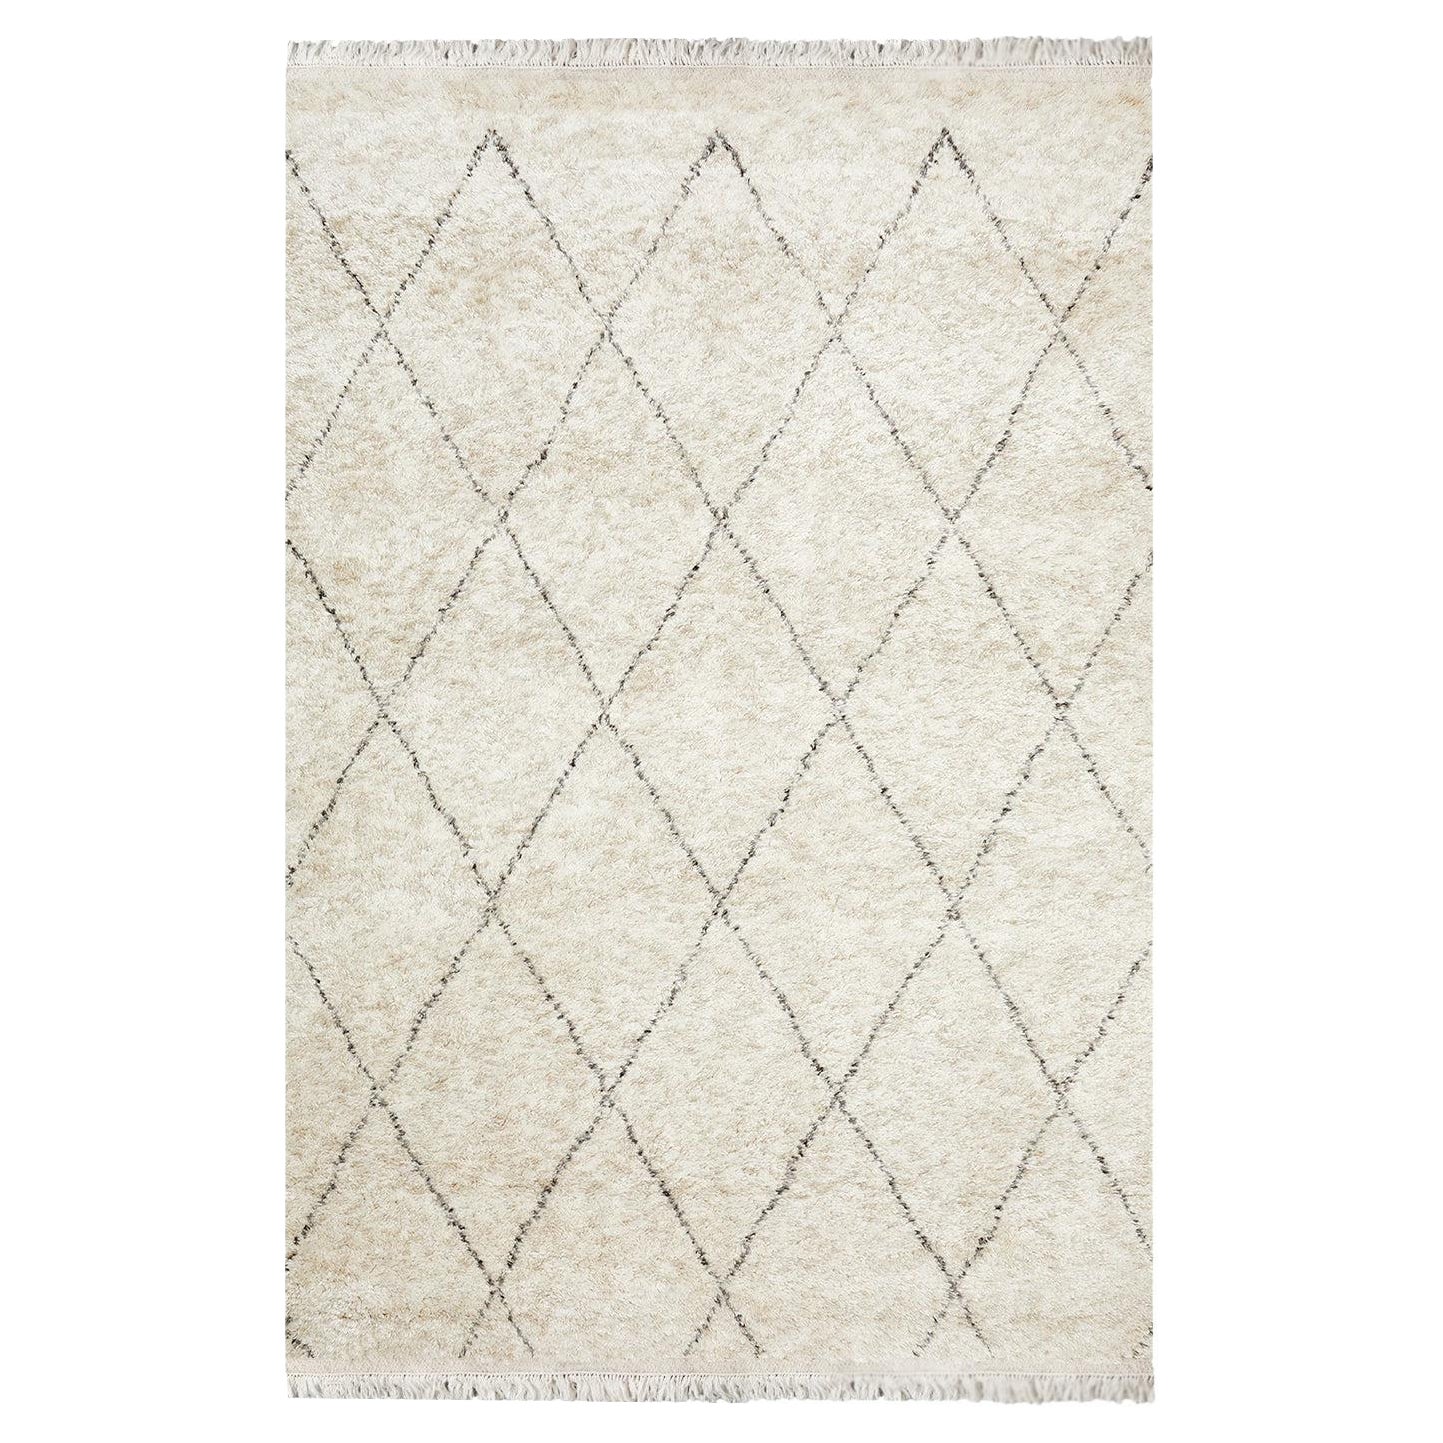 Solo Rugs Shaggy Moroccan Bohemian Moroccan Handmade Area Rug Ivory For Sale